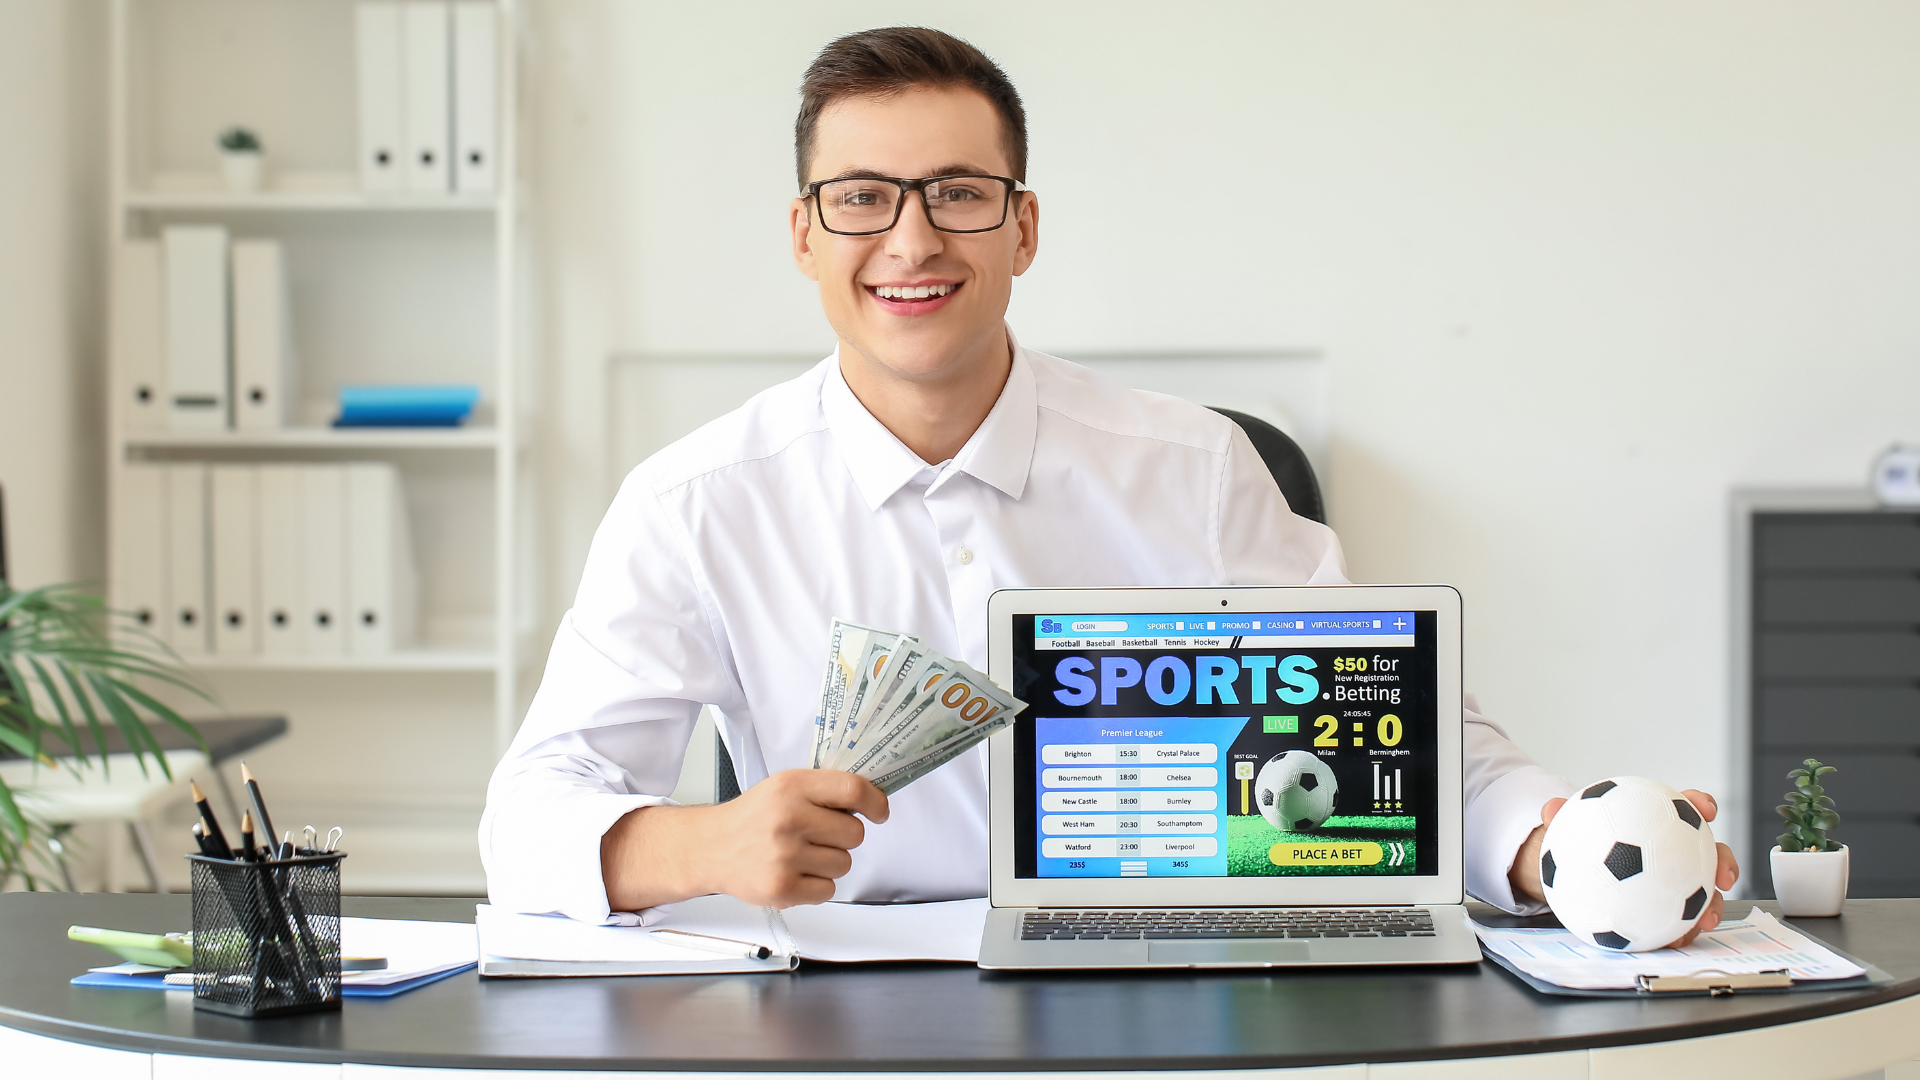 The Top 7 Strategies to Improve Your Sports Betting Skills